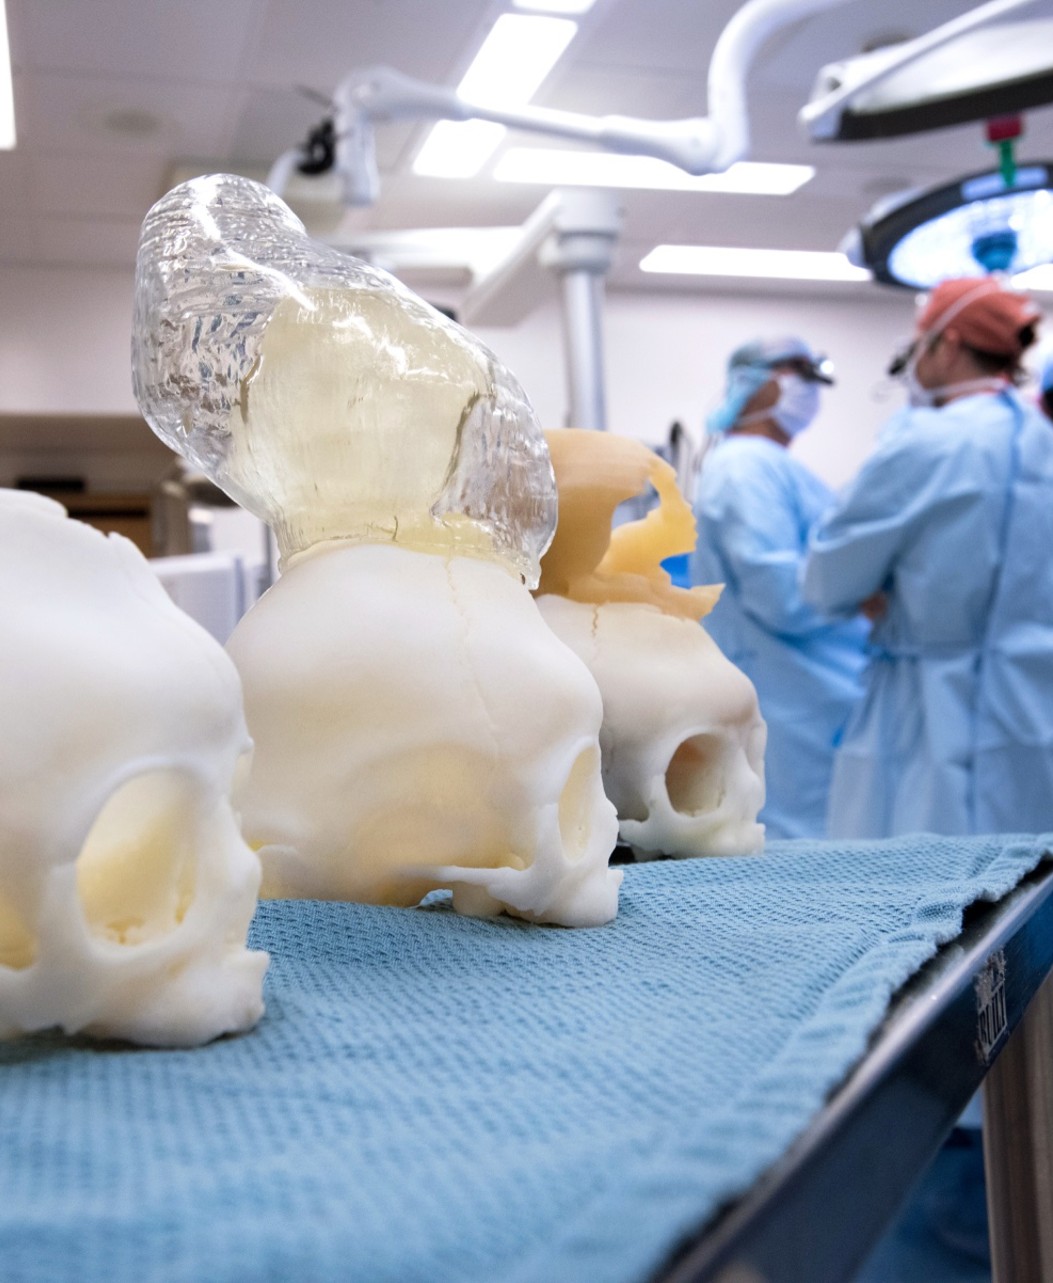 Three simulation skulls sit on a table in front of doctors in scrubs who are looking away from the camera.